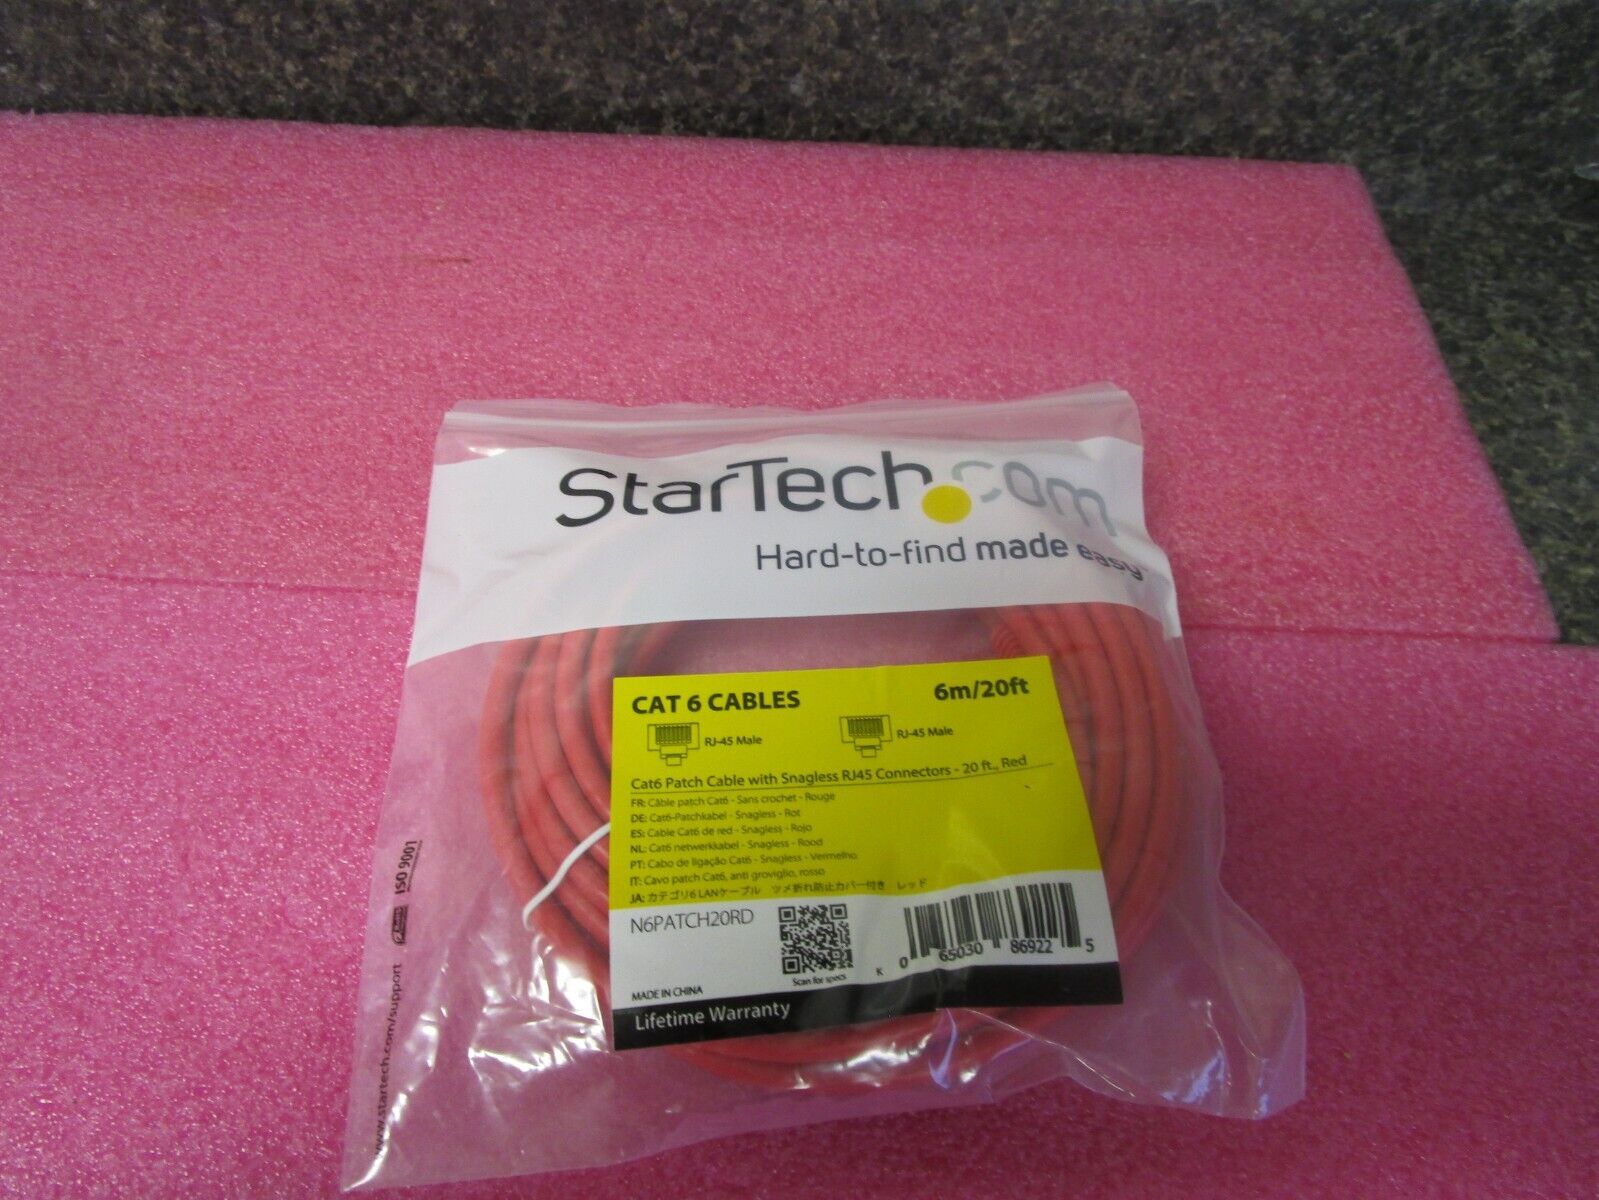 NEW Qty (10) StarTech 20ft CAT6 Ethernet Cables Red N6PATCH20RD